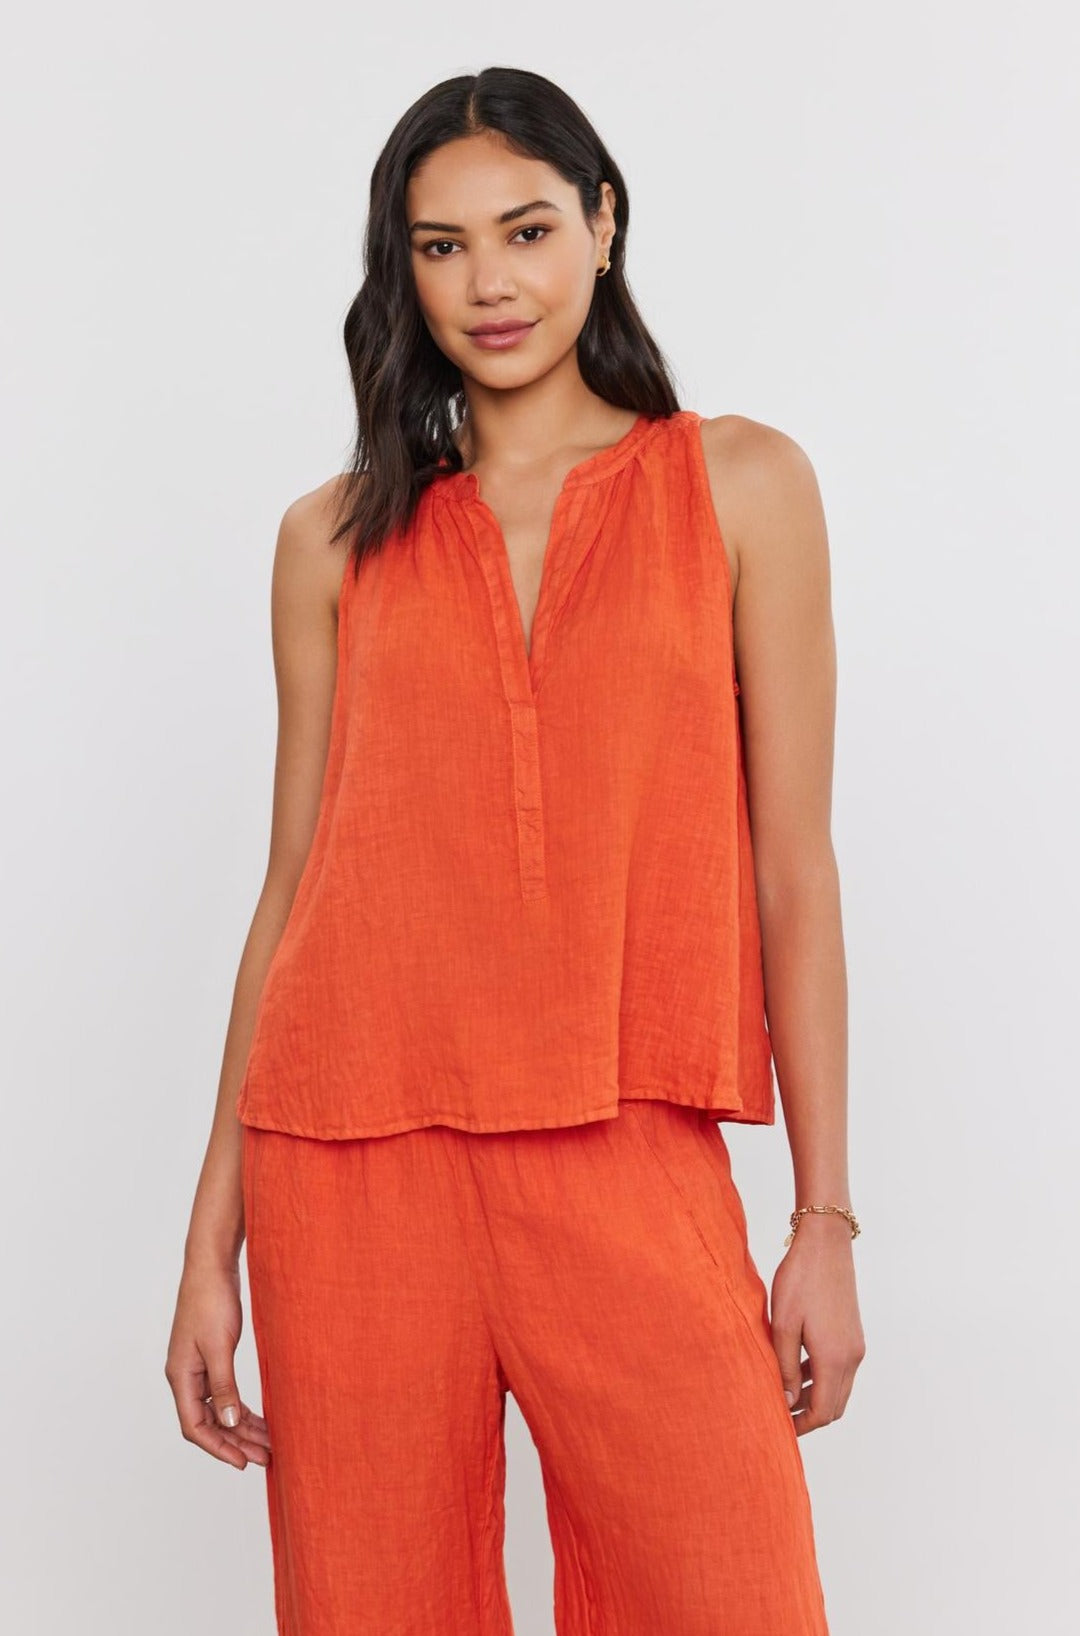 A woman stands against a plain background, wearing a sleeveless orange TACY LINEN TANK TOP with a high-low scooped hemline and matching pants, looking at the camera by Velvet by Graham & Spencer.-36909998440641